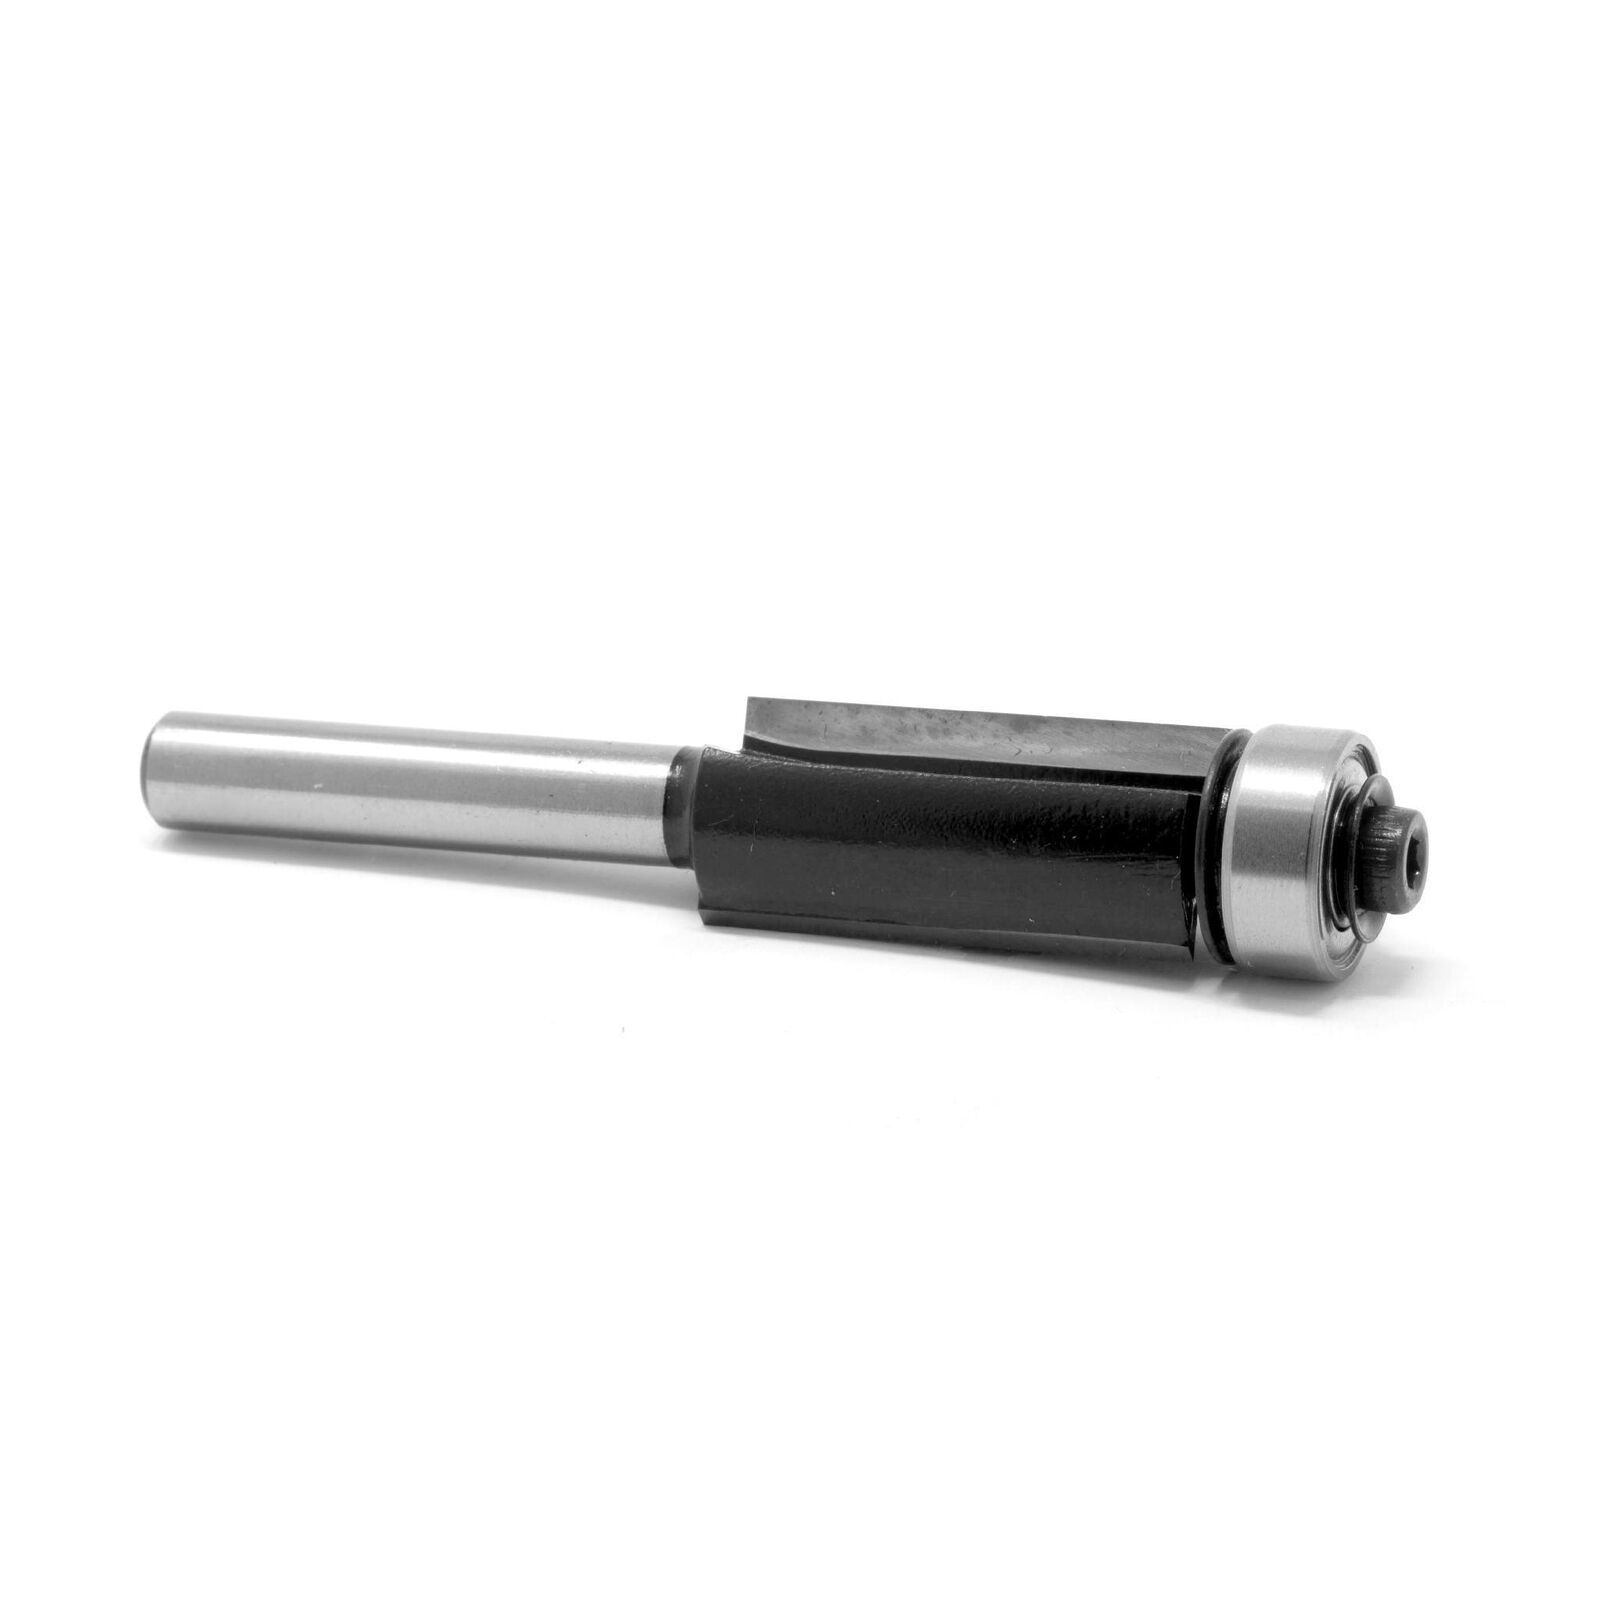 WEN RB404FT 1/2 in. Flush Trim Router Bit, 1/4 in. Shank and 1 in. Length - $29.99